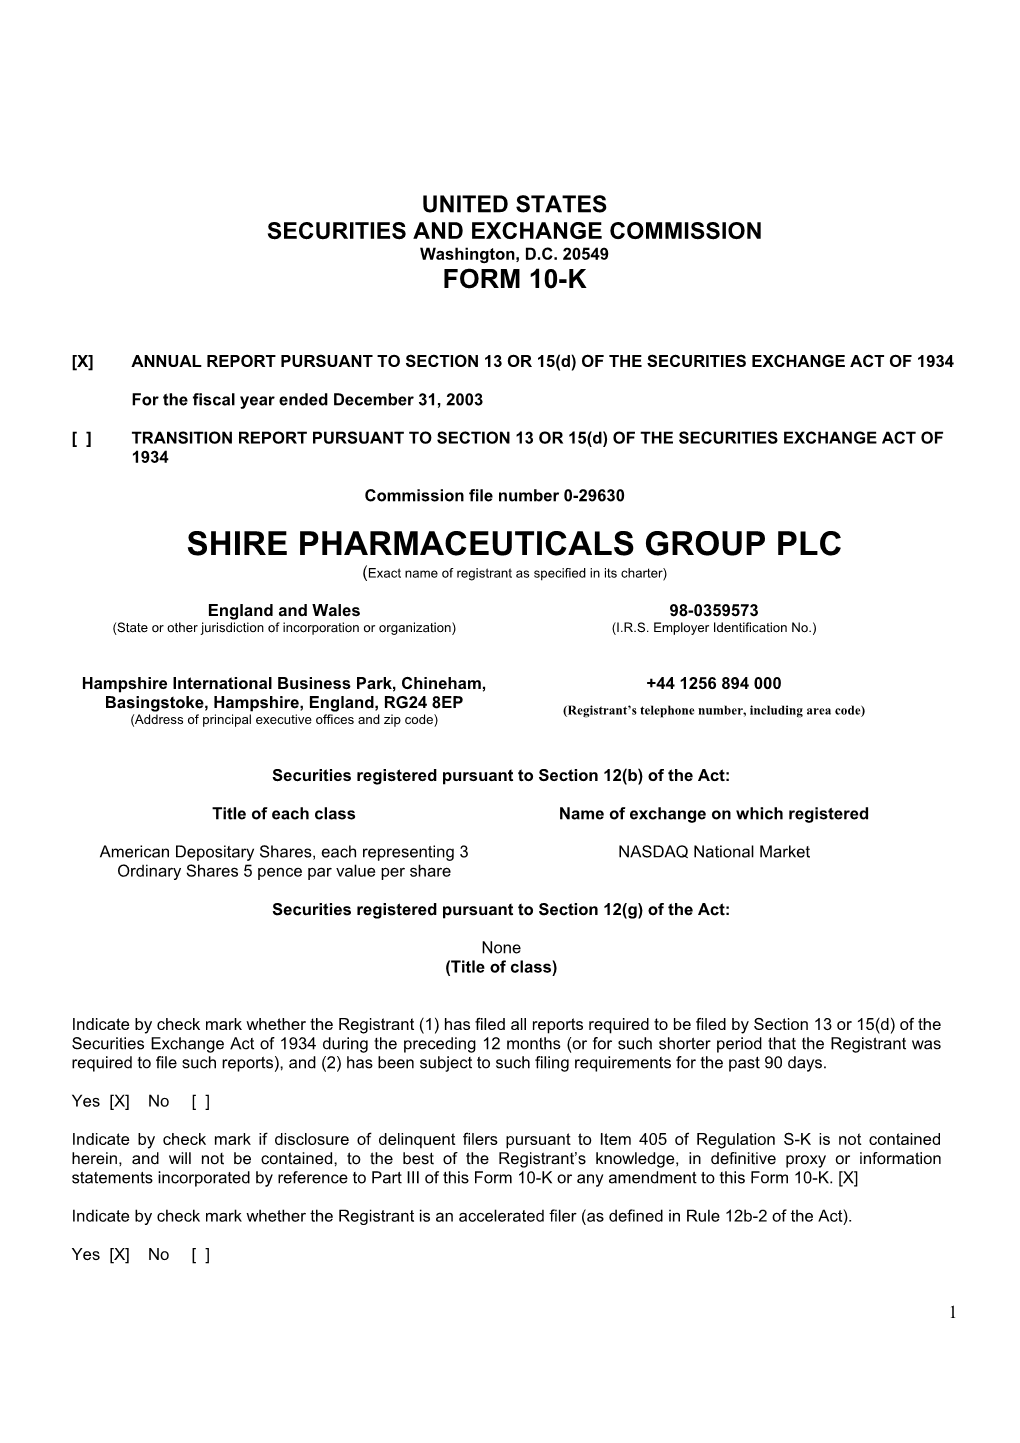 SHIRE PHARMACEUTICALS GROUP PLC (Exact Name of Registrant As Specified in Its Charter)